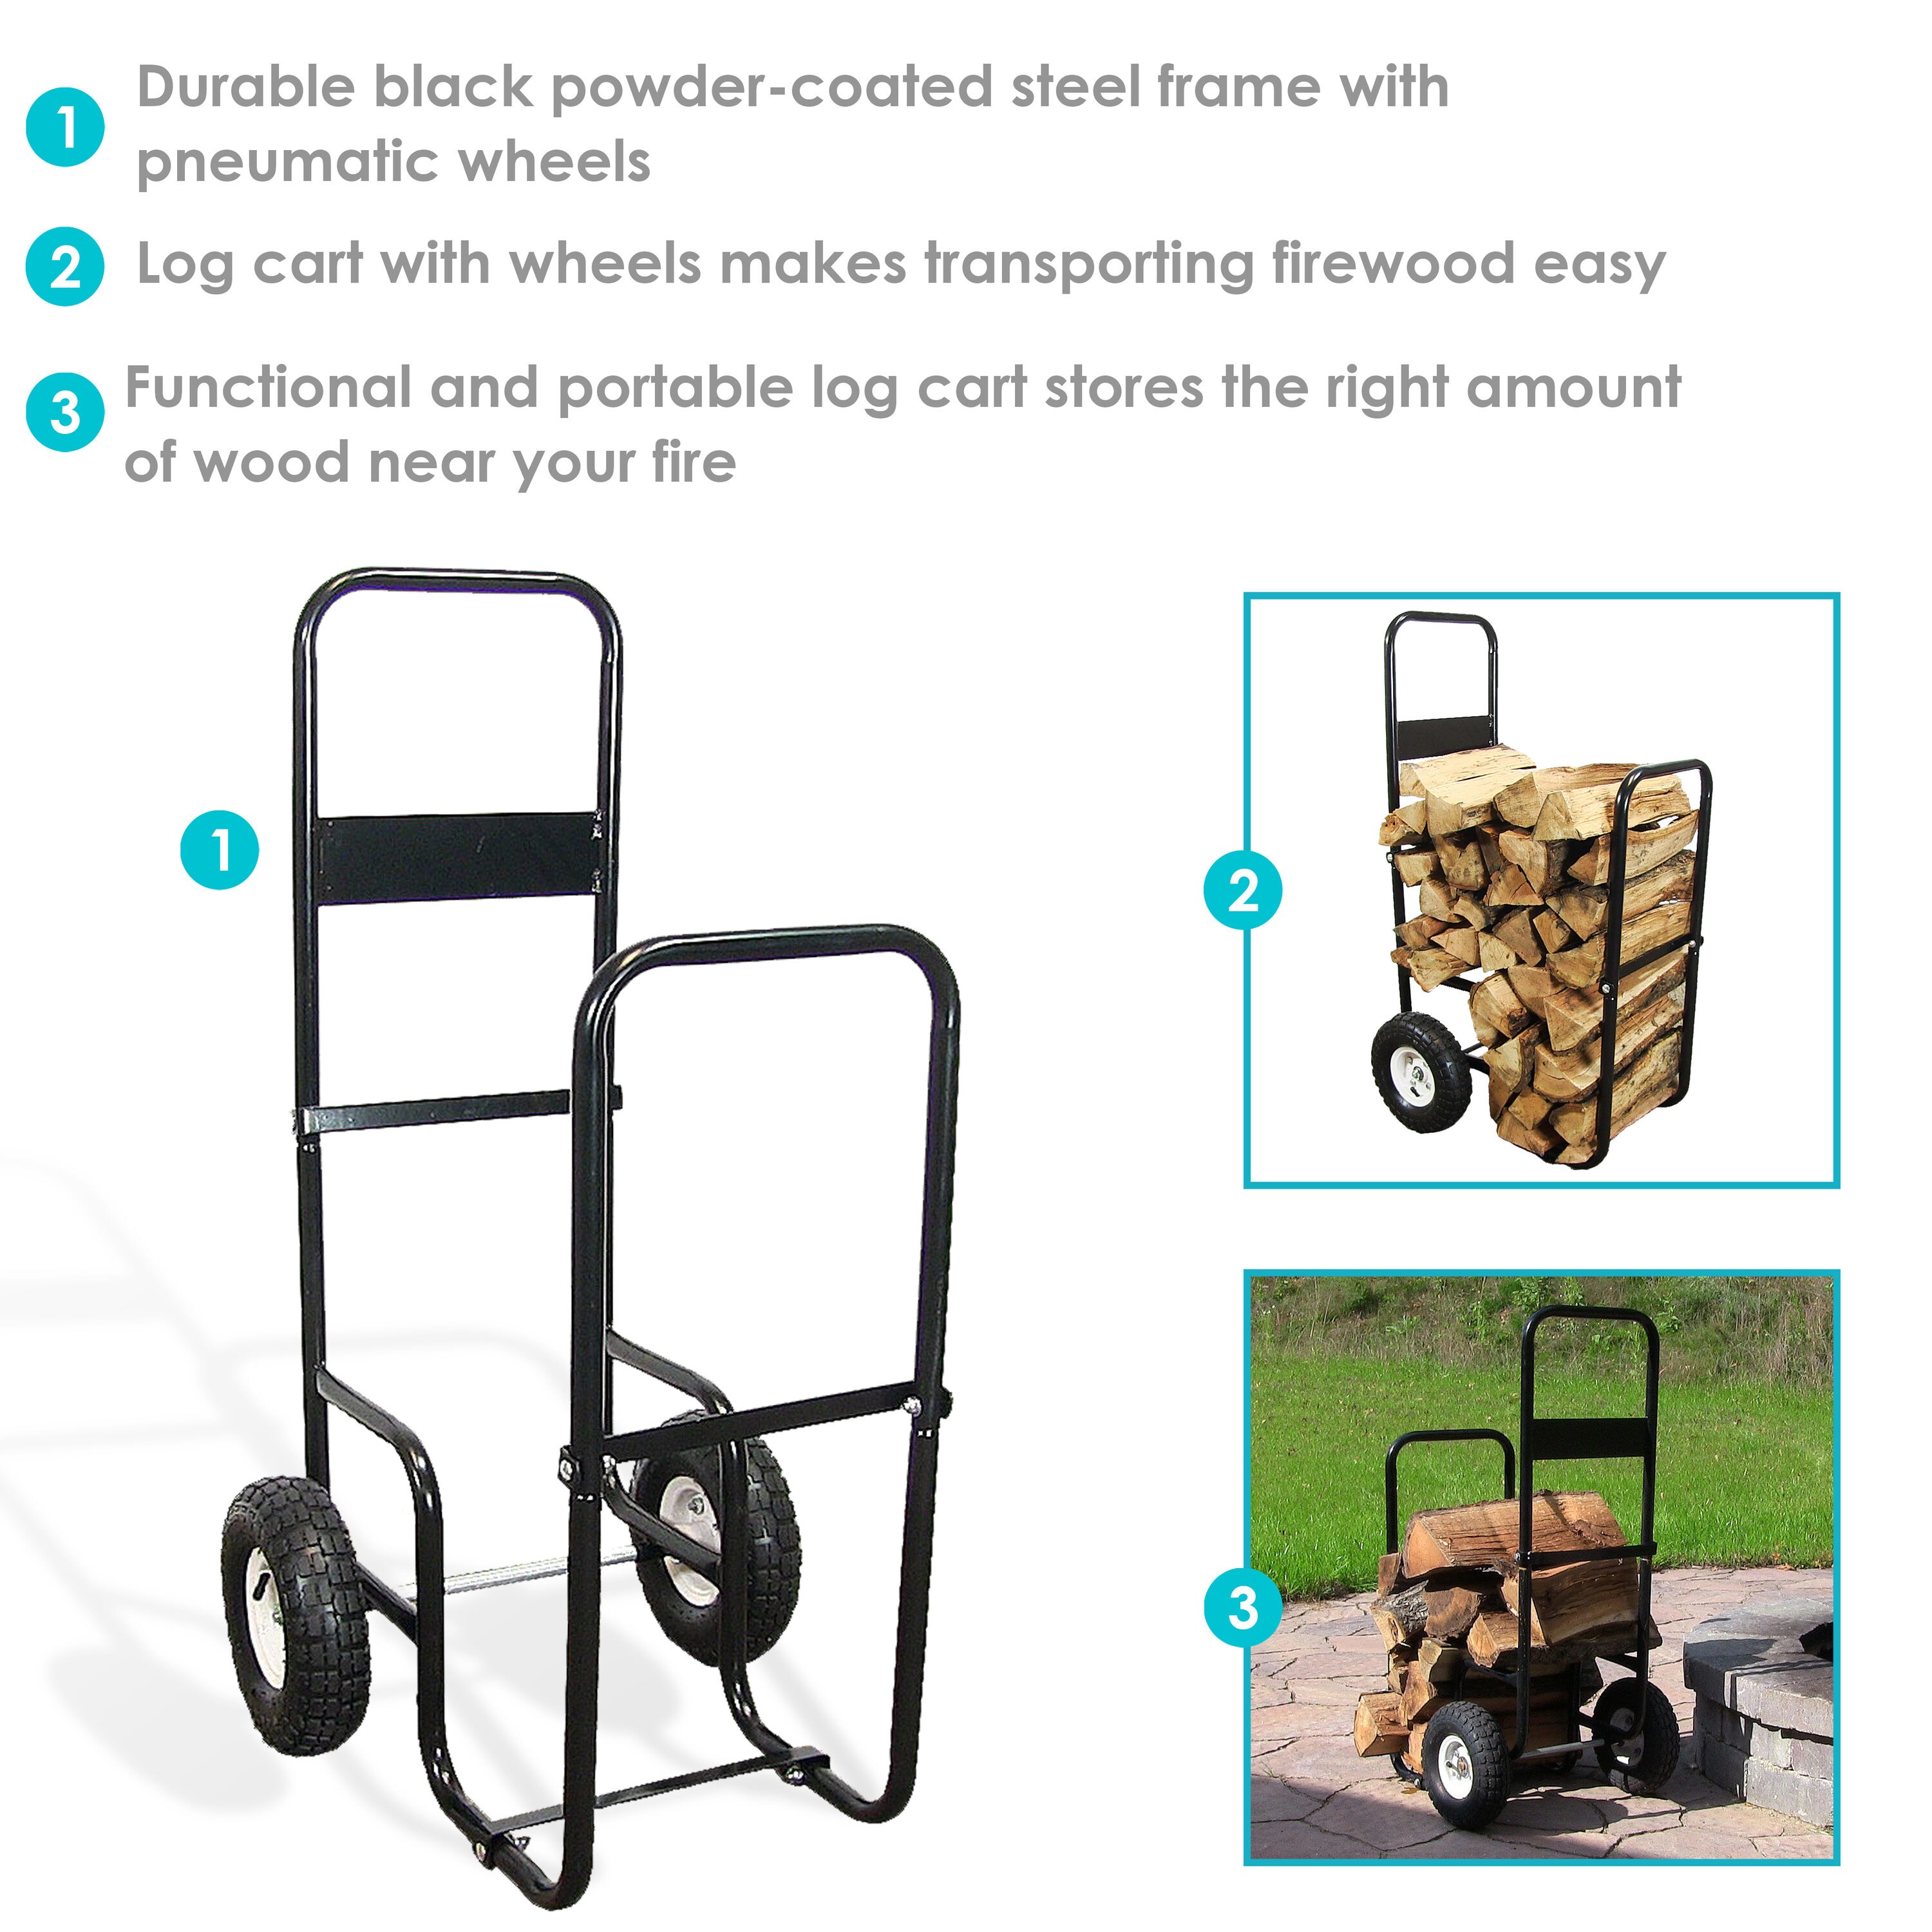 Rolling Dolly Hauler Outdoor Wood Rack Storage Mover Sunnydaze Firewood Log Cart Carrier with Heavy Duty Waterproof Cover COMBO 